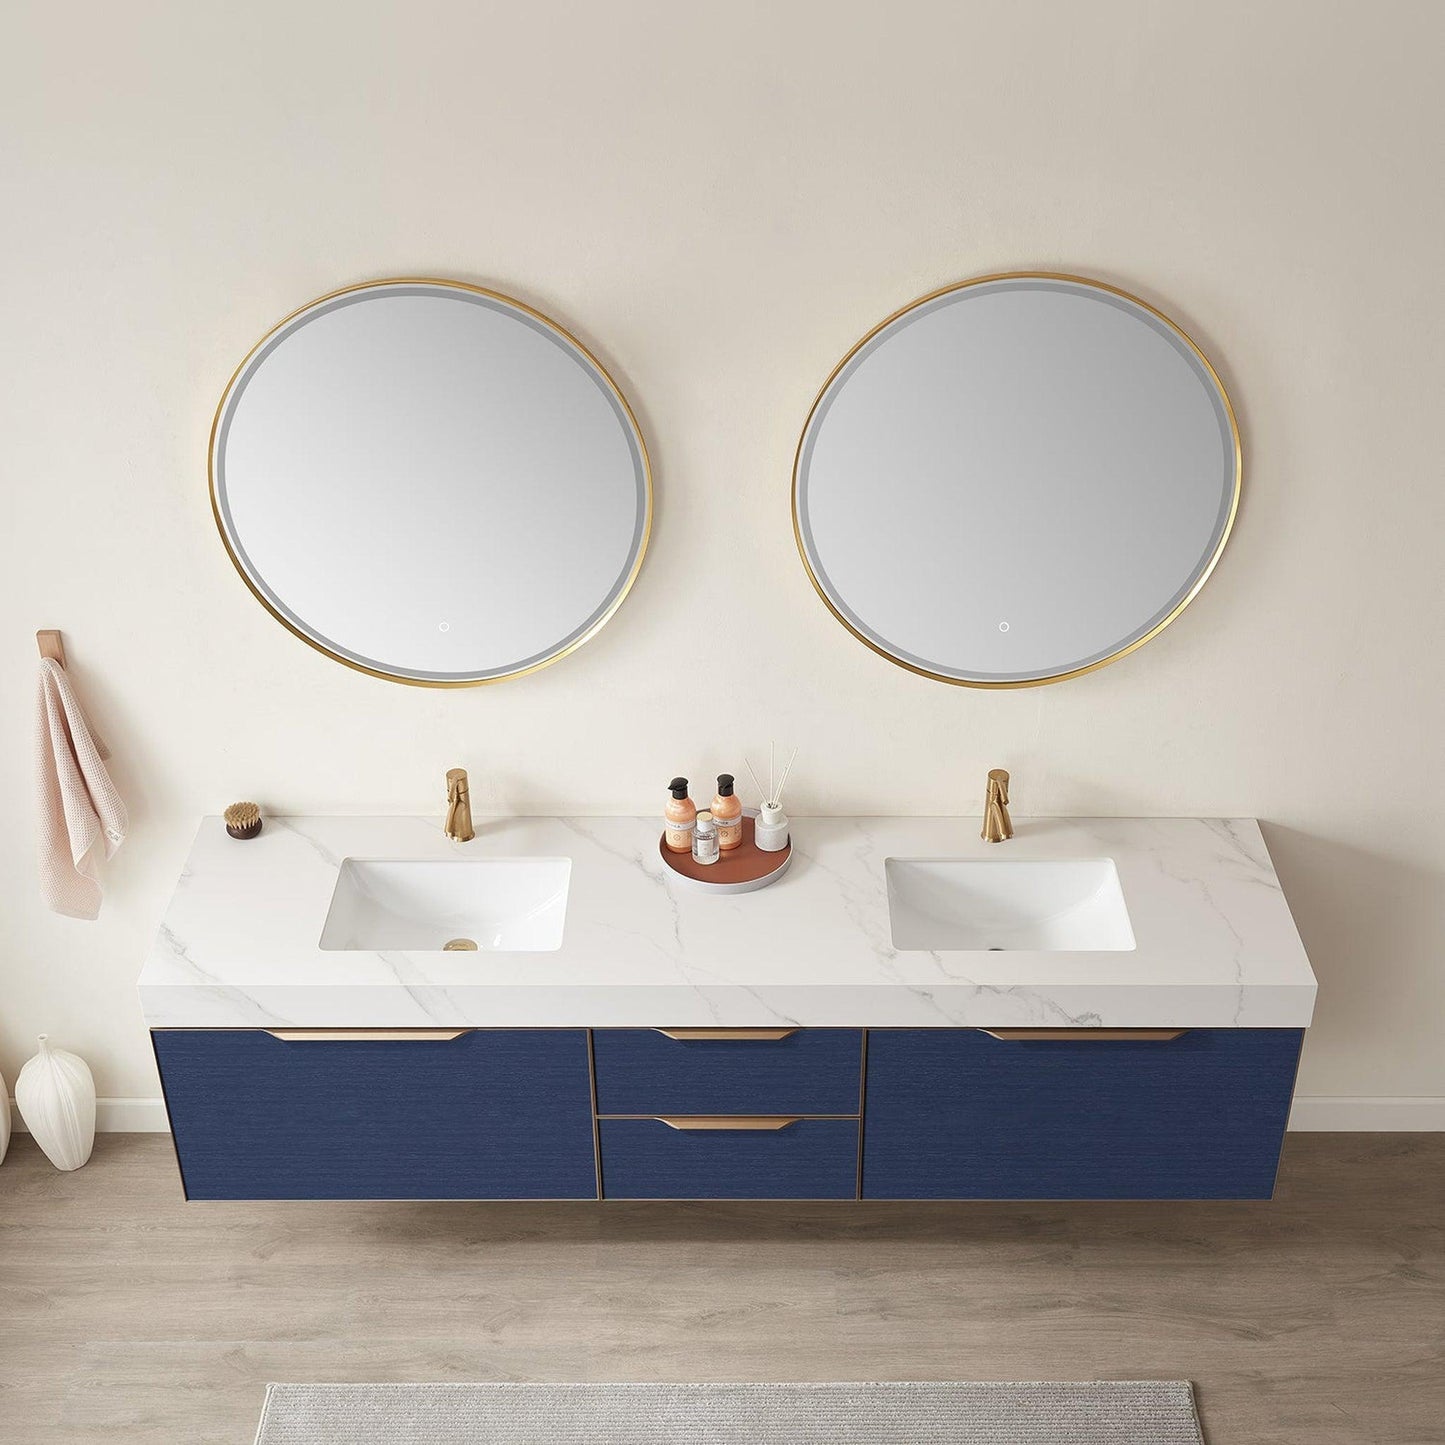 Vinnova Alicante 84" Double Vanity In Classic Blue With White Sintered Stone Countertop And Undermount Sink With Mirror